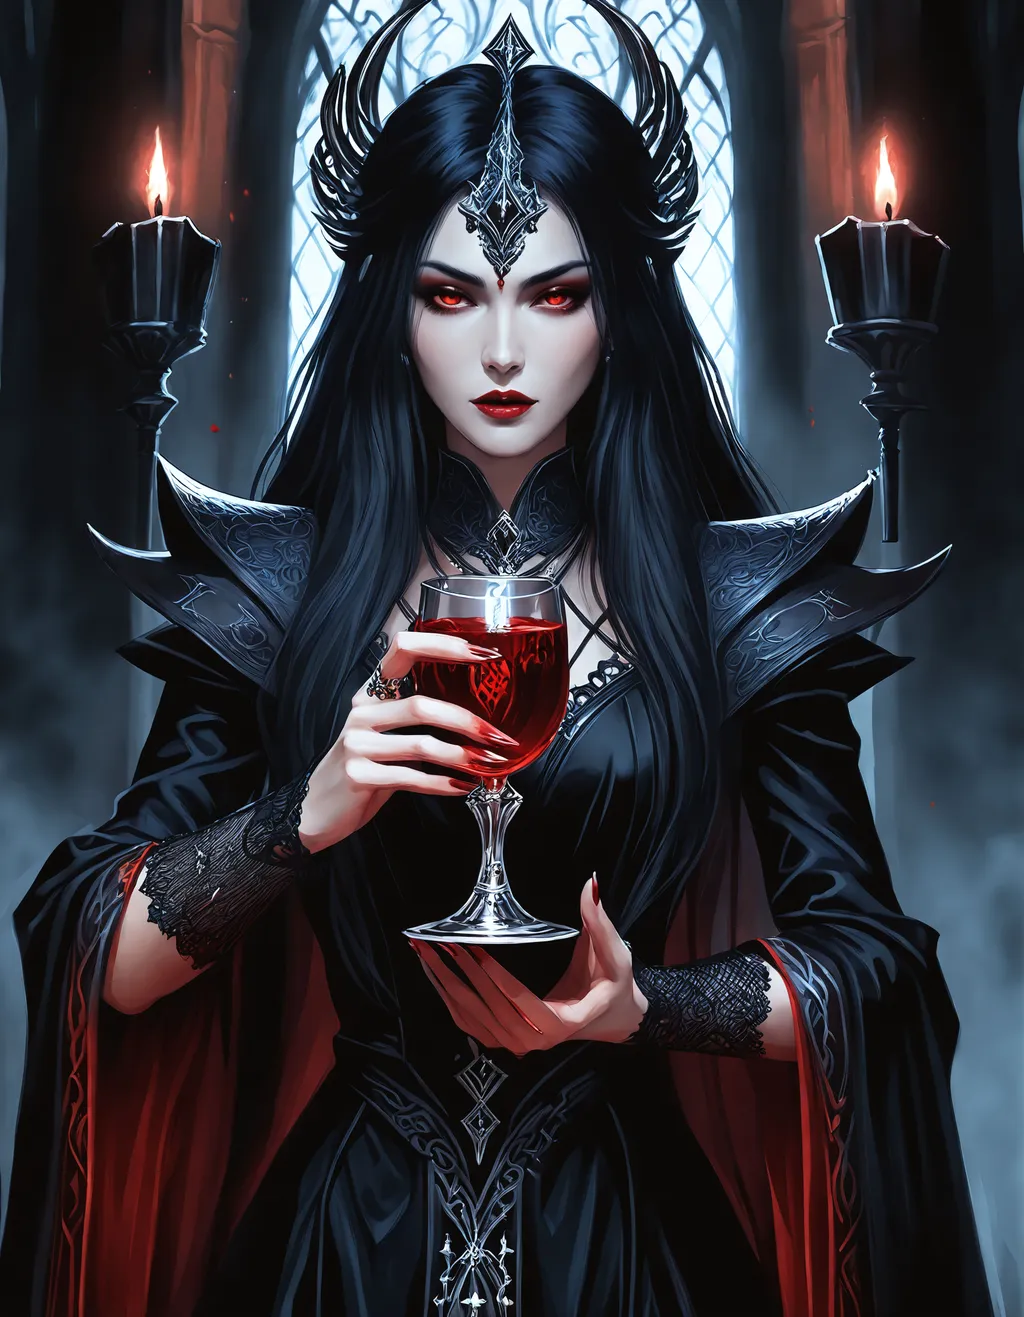 Prompt: Chthonic sorceress holding a goblet of blood, Stygian, Phantasmagoric, Sepulchral, Cimmerian, ((breathtaking)), ((striking)), ((realistic character)), ((stylized digital painting)), ((fantasy)), ((invokes an emotional response)), ((realistic artwork)), ((riveting)), ((captivating)), ((attractive)) (elegant), black velvet, lace accents, occult, female cult leader.